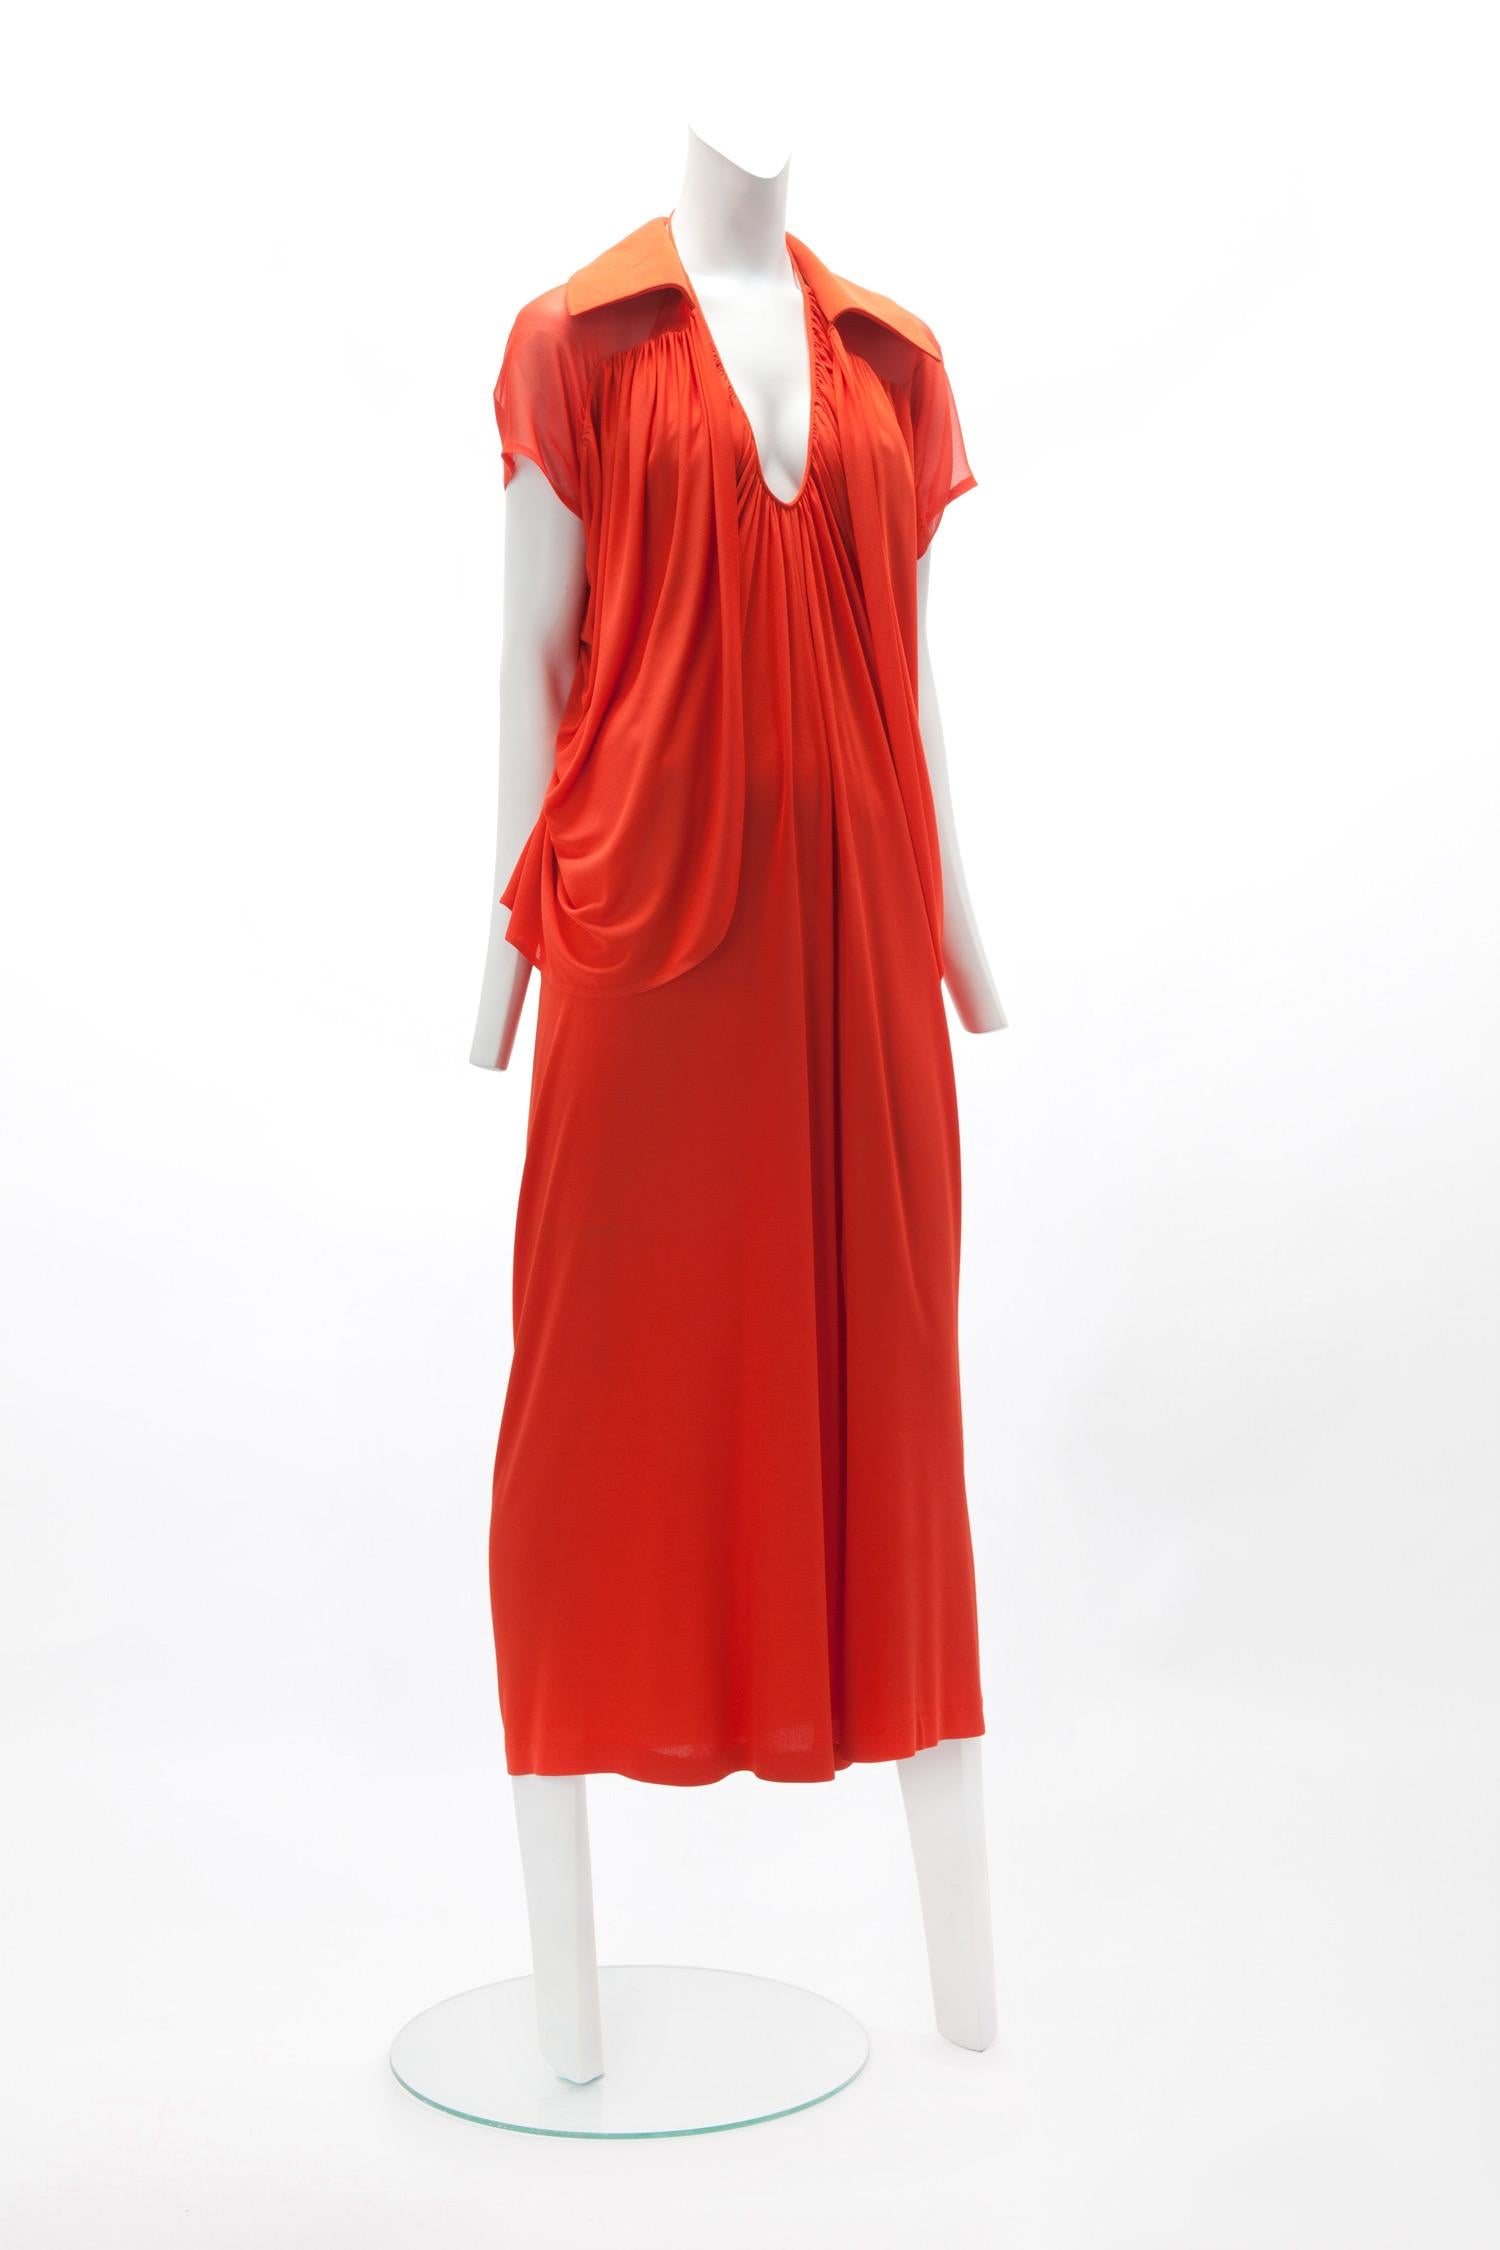 c. 1970s HALSTON Orange Matte Jersey Halter Dress with Matching Jacket; Draped U-Neckline with Cowl Back; Rouleau Strap with Hook and Eye Closure; Slit at Center Front; Short Sleeve Jacket with Chiffon Yoke; Labeled 